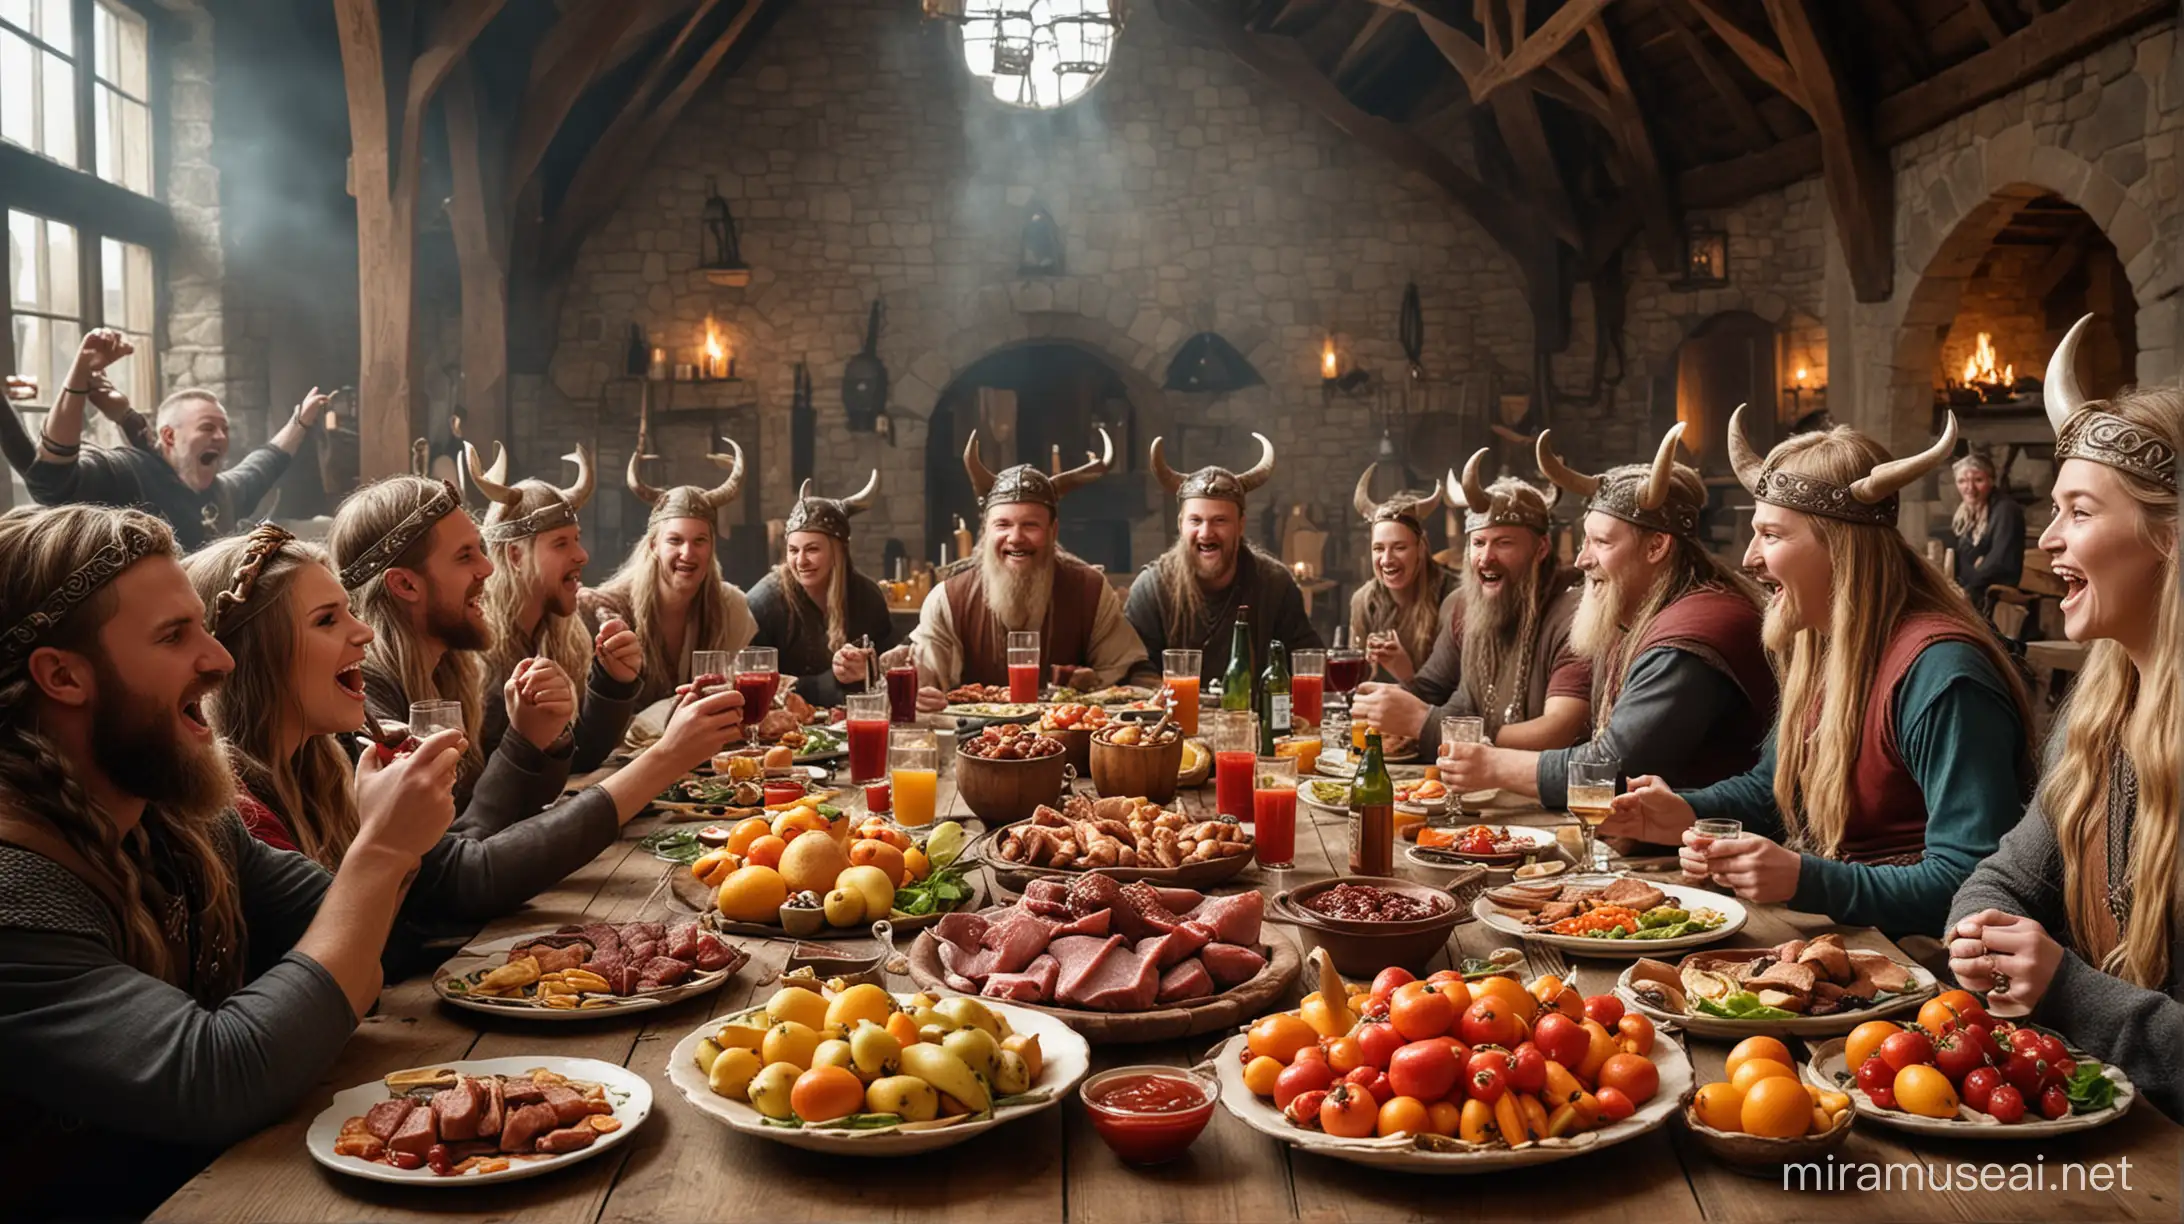 We see Vikings sitting around a table in an old Viking communal hall where they are feasting like crazy.  They are having a lot of fun. Some of them are shouting with their drinks in the air, some are eating their food with appetite, others are hugging each other and singing. On the table we see the horns from which the Vikings drank wine, a whole cooked pig, fruits and a bottle of Heinz hot ketchup, among many other beautiful foods that can be used for a feast. Make this image look like a photograph.